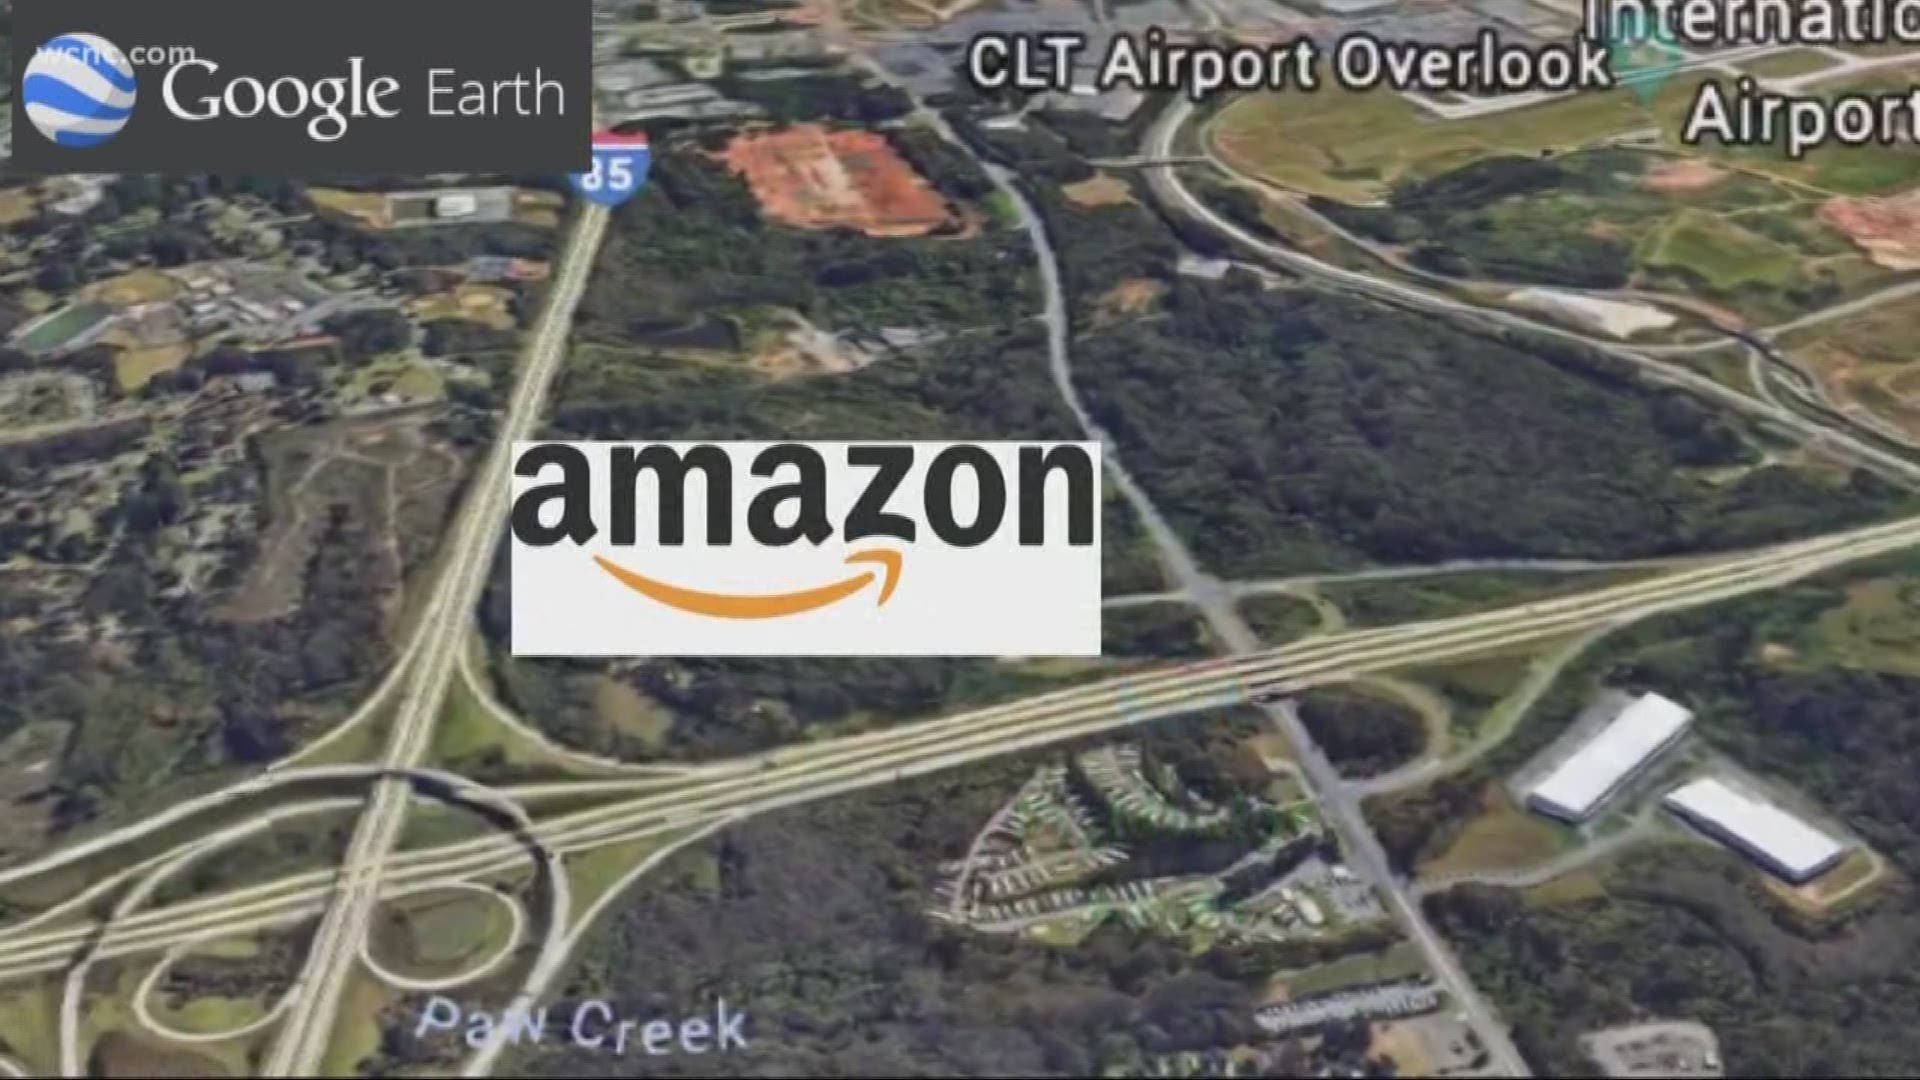 After missing out on a possible second Amazon HQ, Charlotte is ready to roll out the big bucks to attract the multi-billion dollar company.